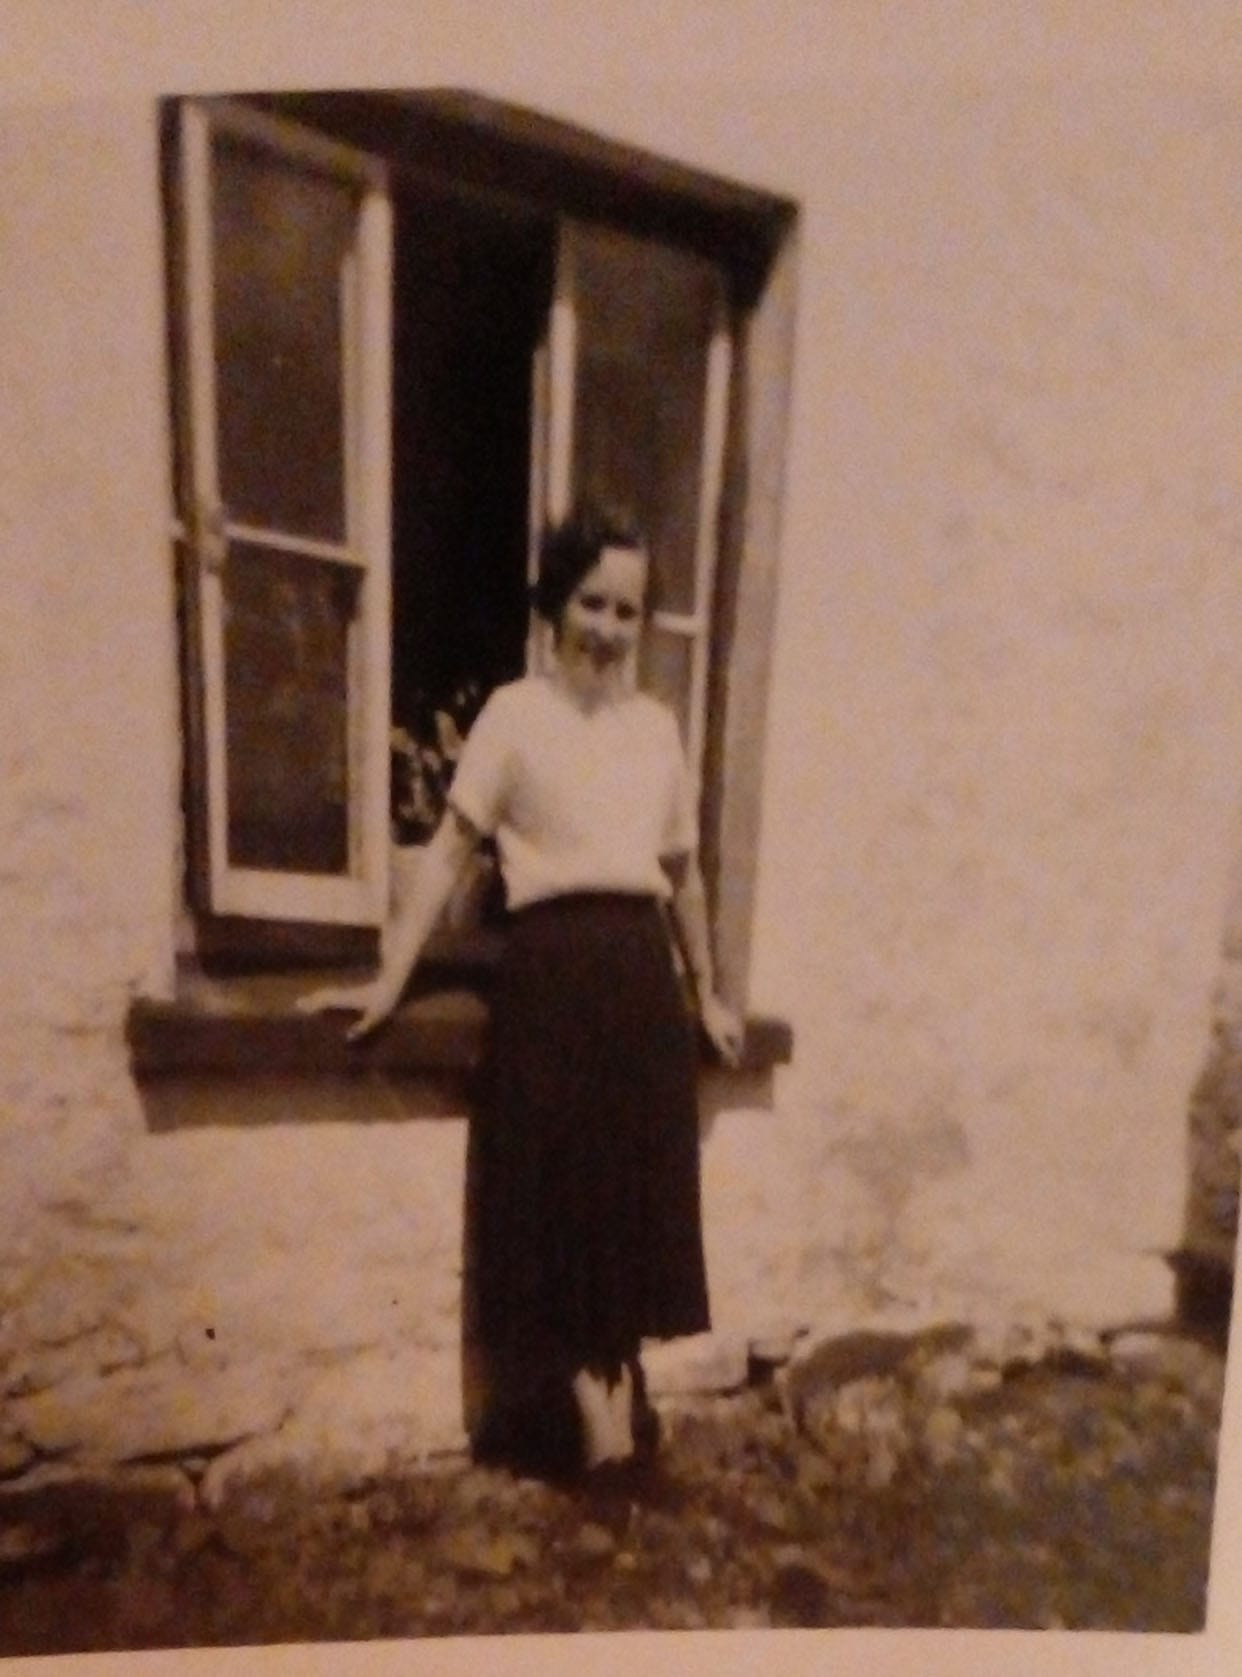 Tillie Craig at some time in the 1950`s. According to local folklore, this house had a small shop incorporated in the building and this is why the window behind Tillie is unusually large for this house.